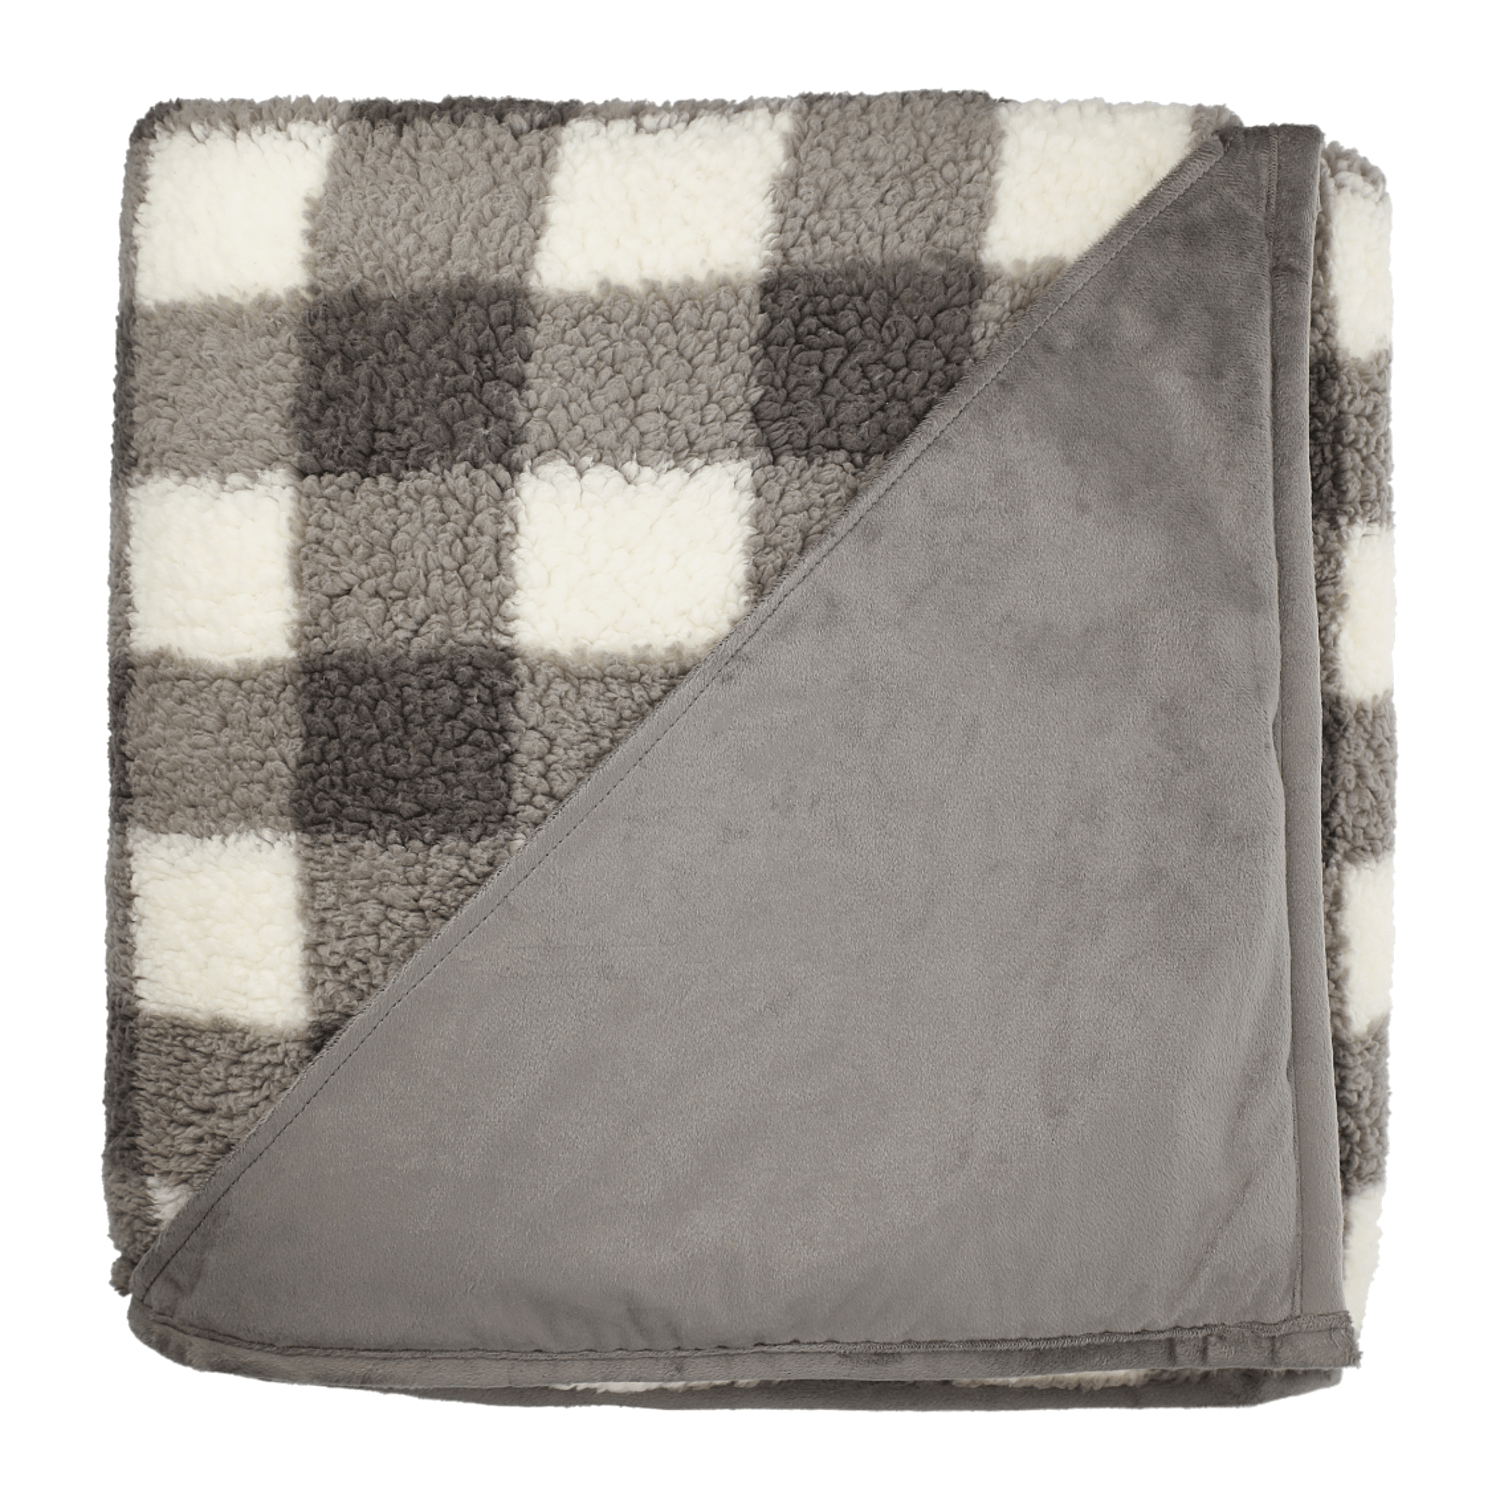 Field & Co Accessories One Size / Grey/White Field & Co. - Double Sided Plaid Sherpa Blanket